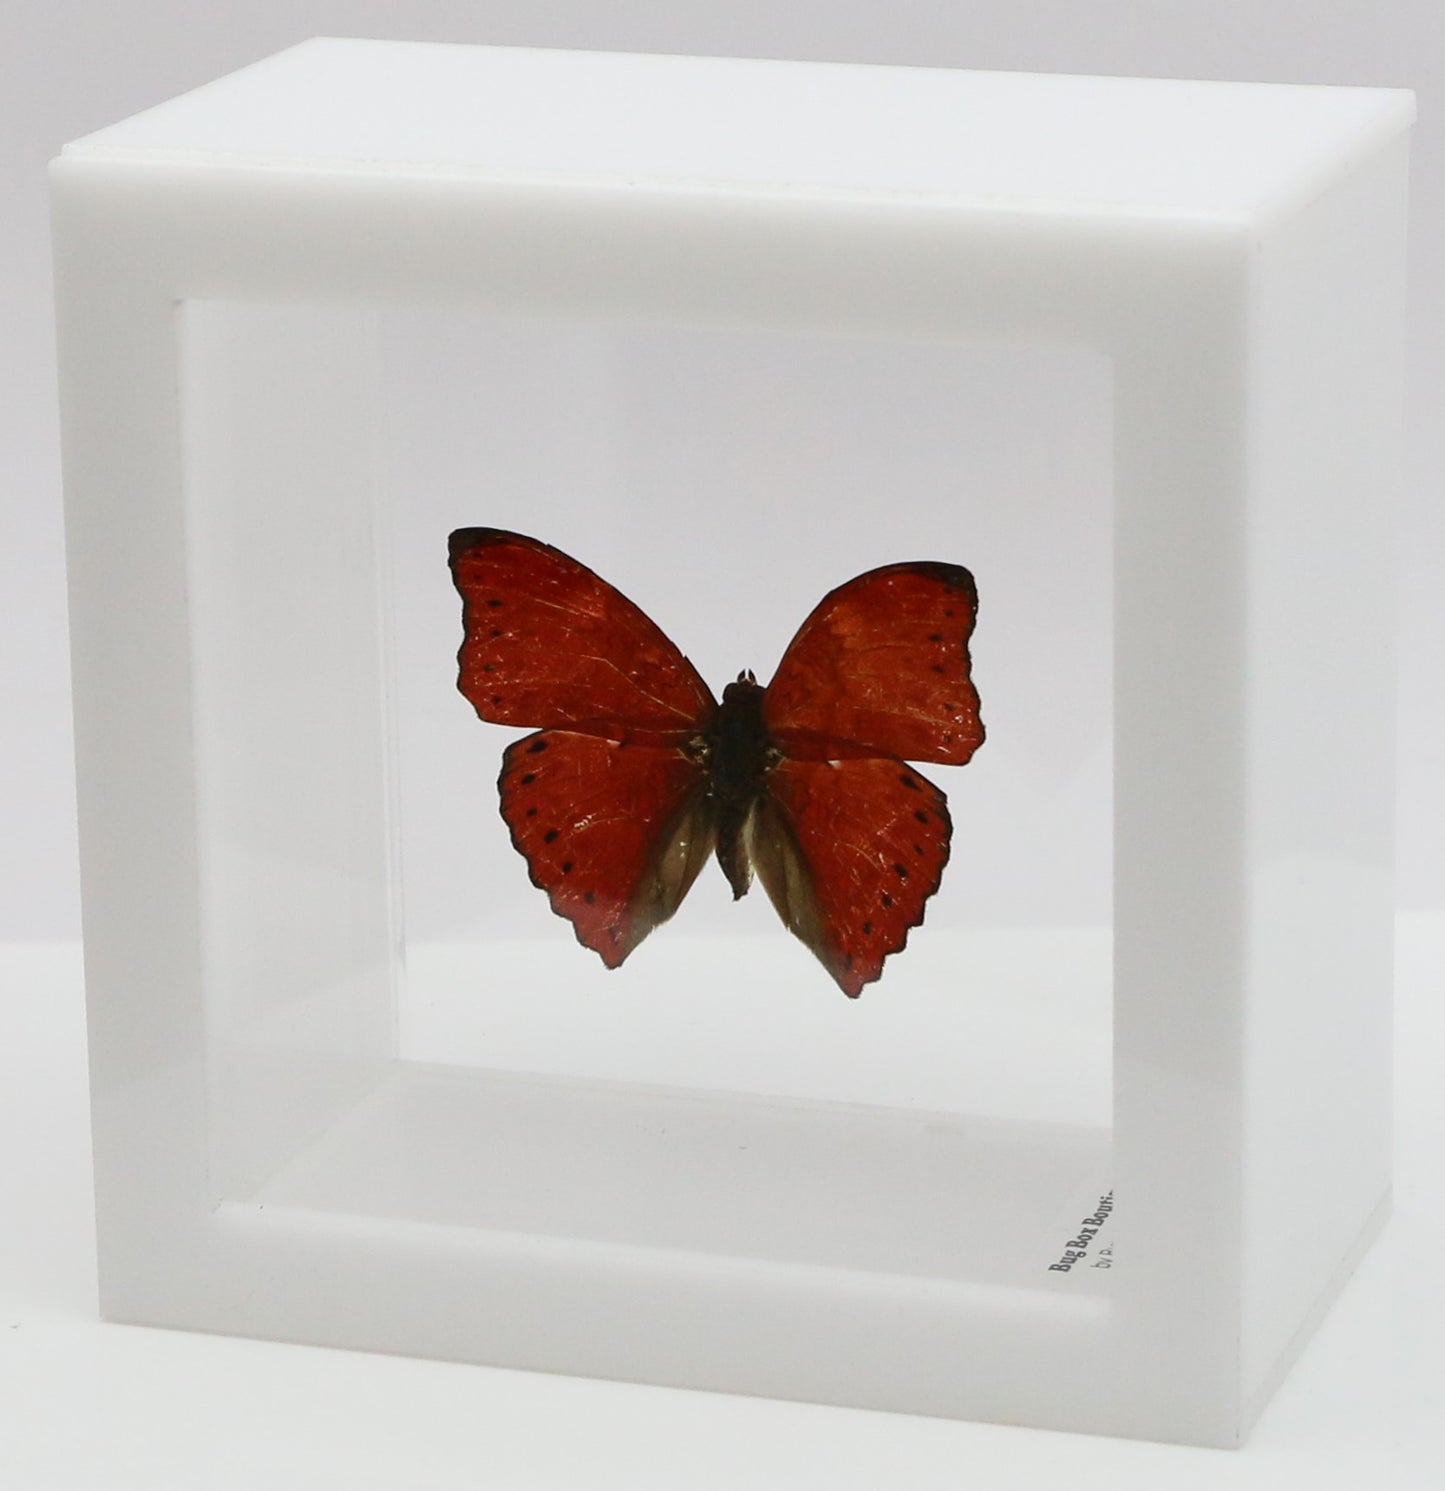 9040404 - Real Butterfly Acrylic Display Box - 4" X 4" - Red Glider Butterfly (Cymothoe sangaris).